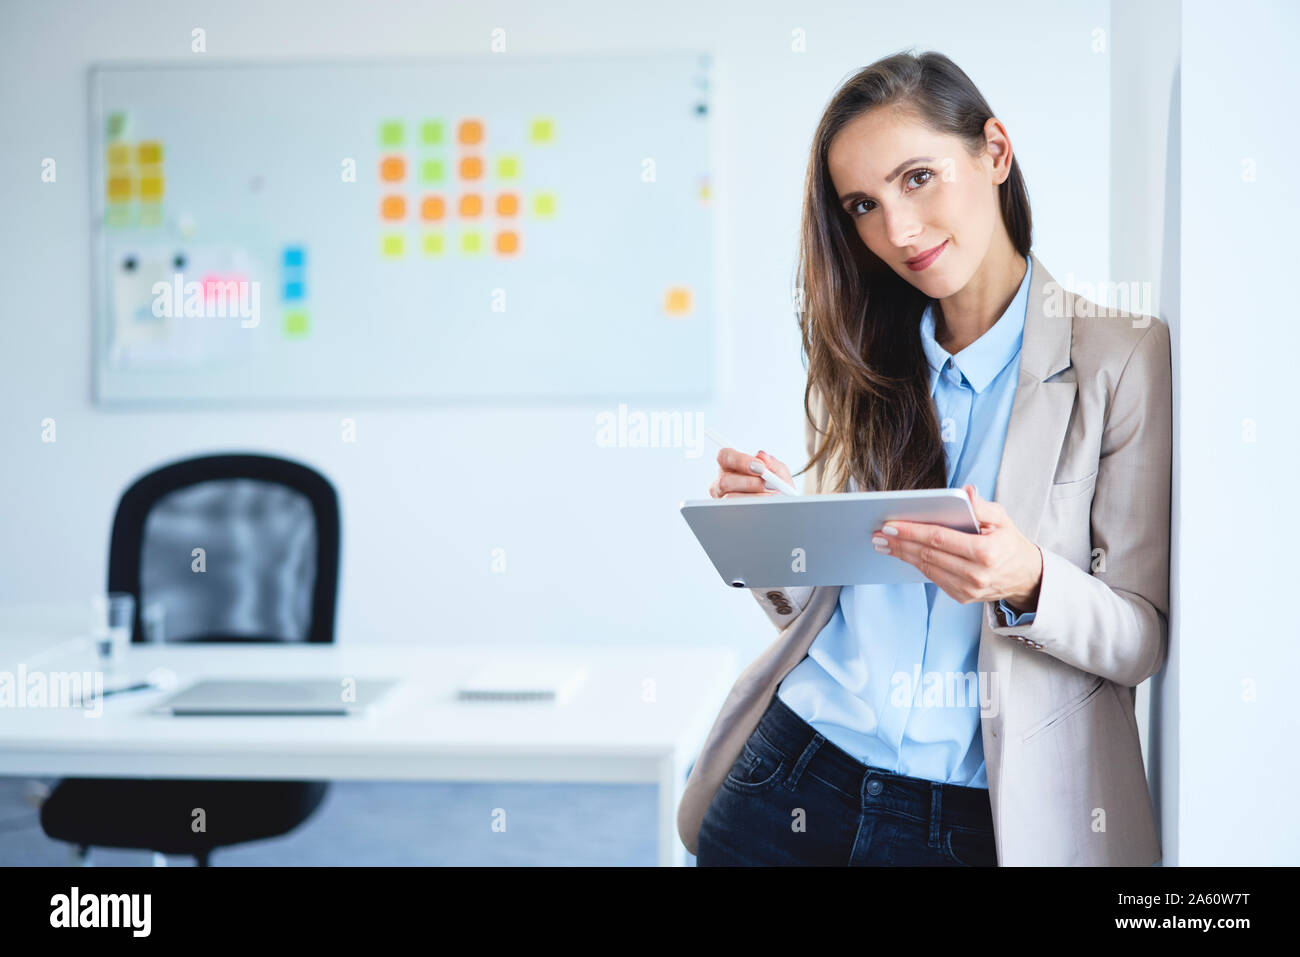 Young businesswoman smiling at camera while using tablet in office Stock Photo